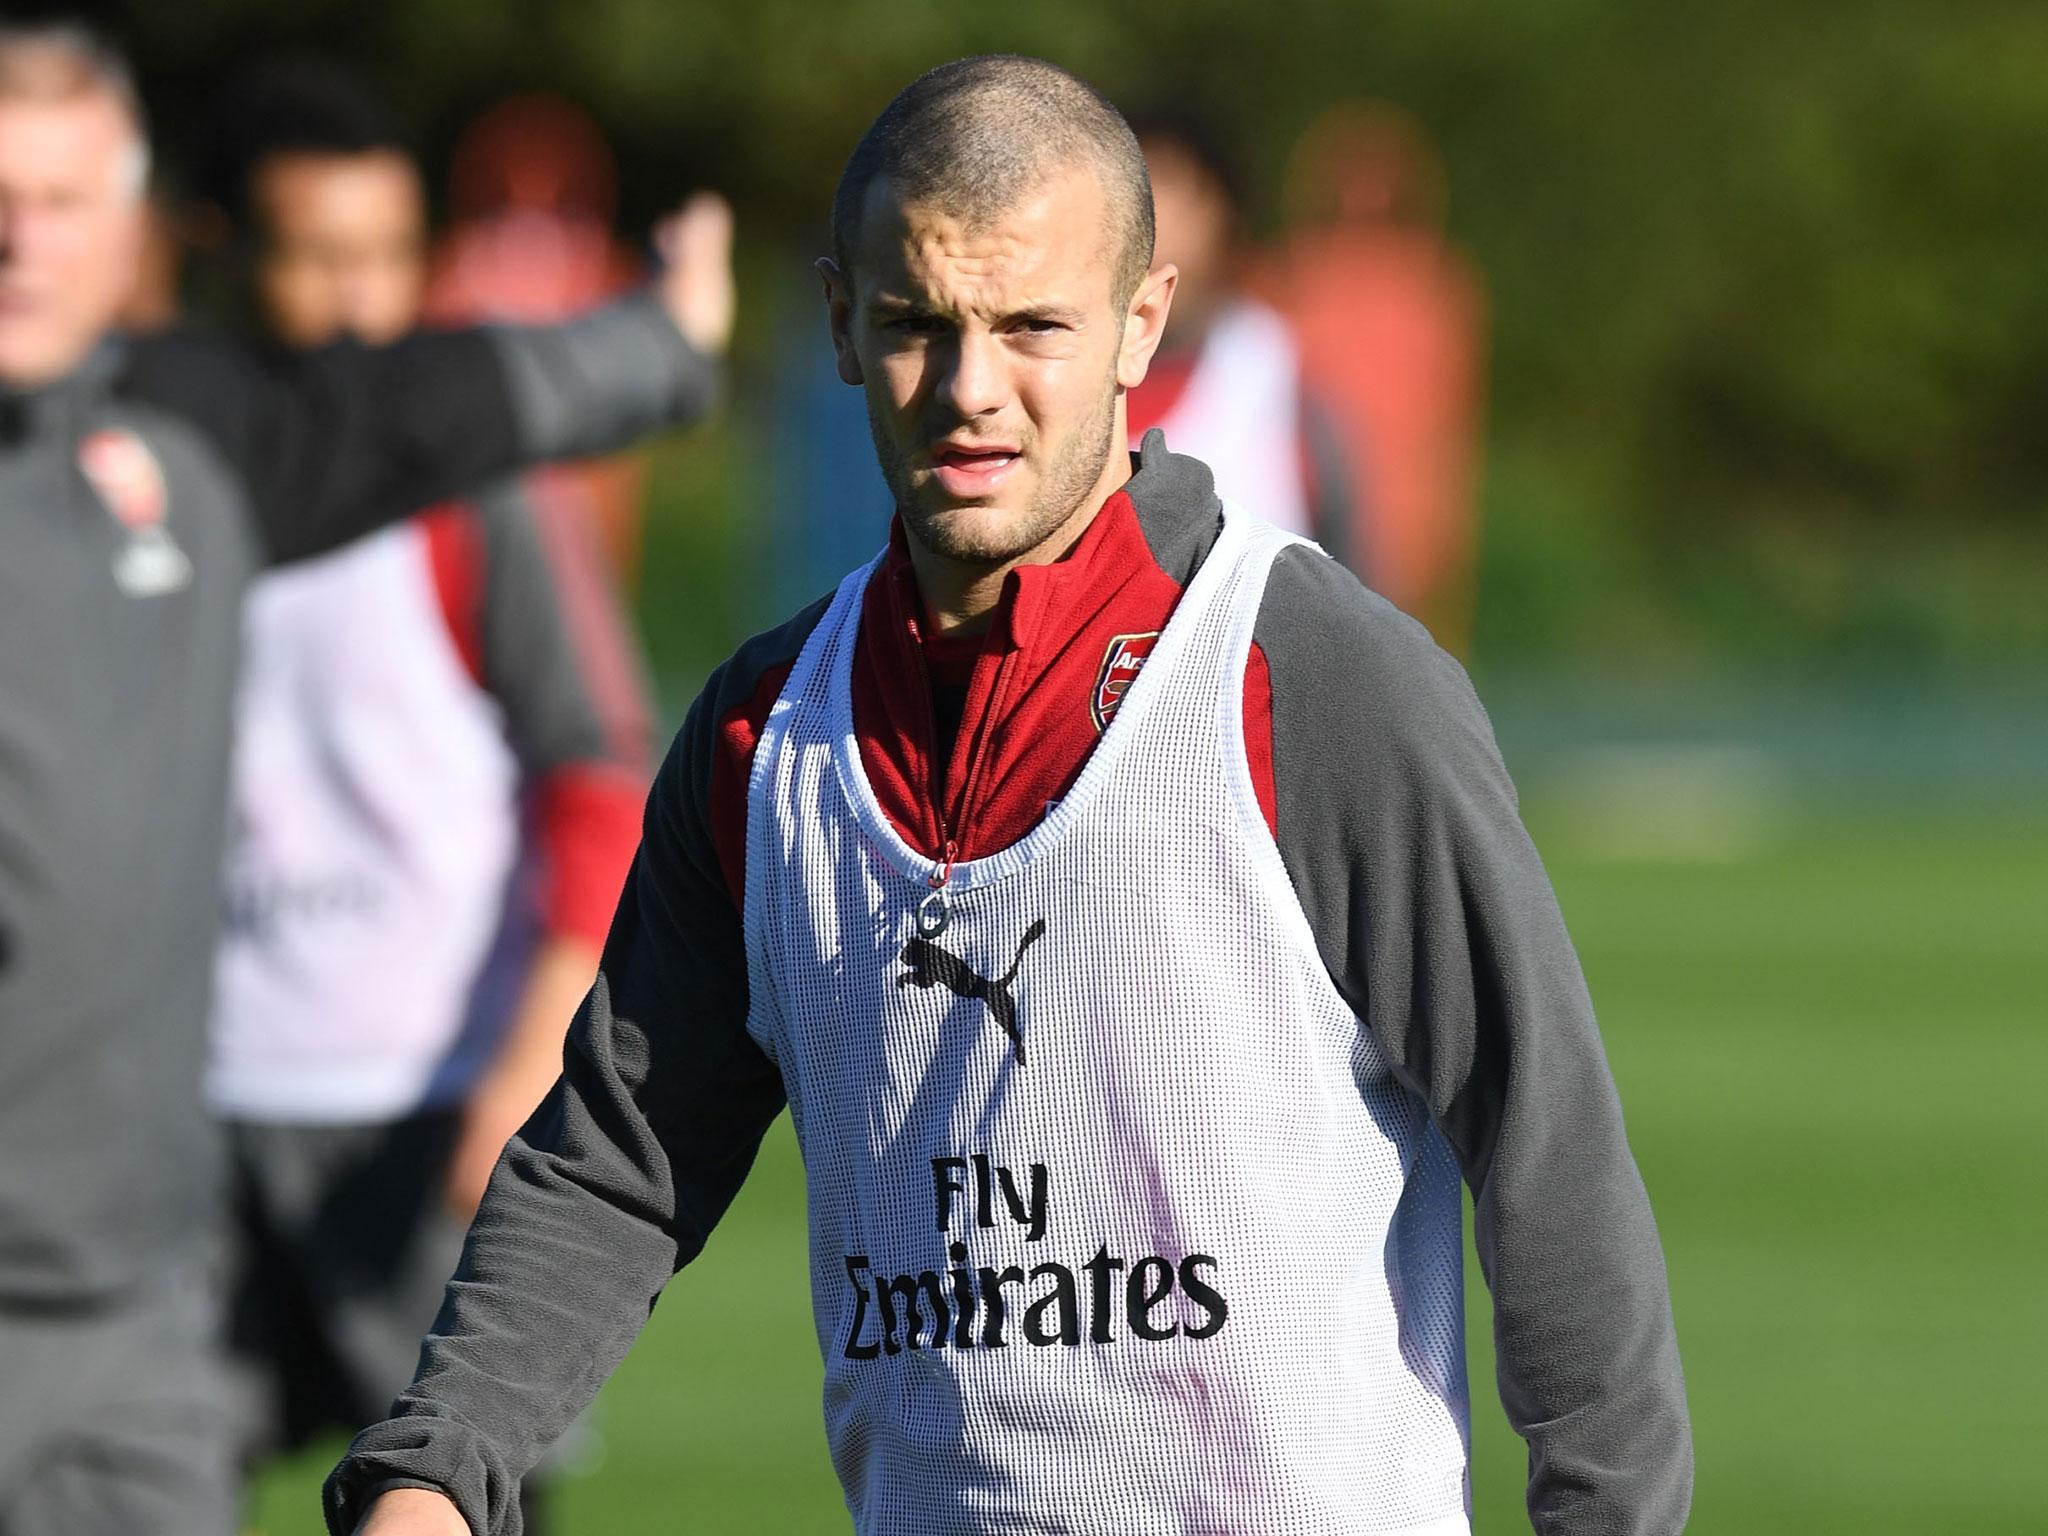 Jack Wilshere has impressed in the Europa League for Arsenal this season